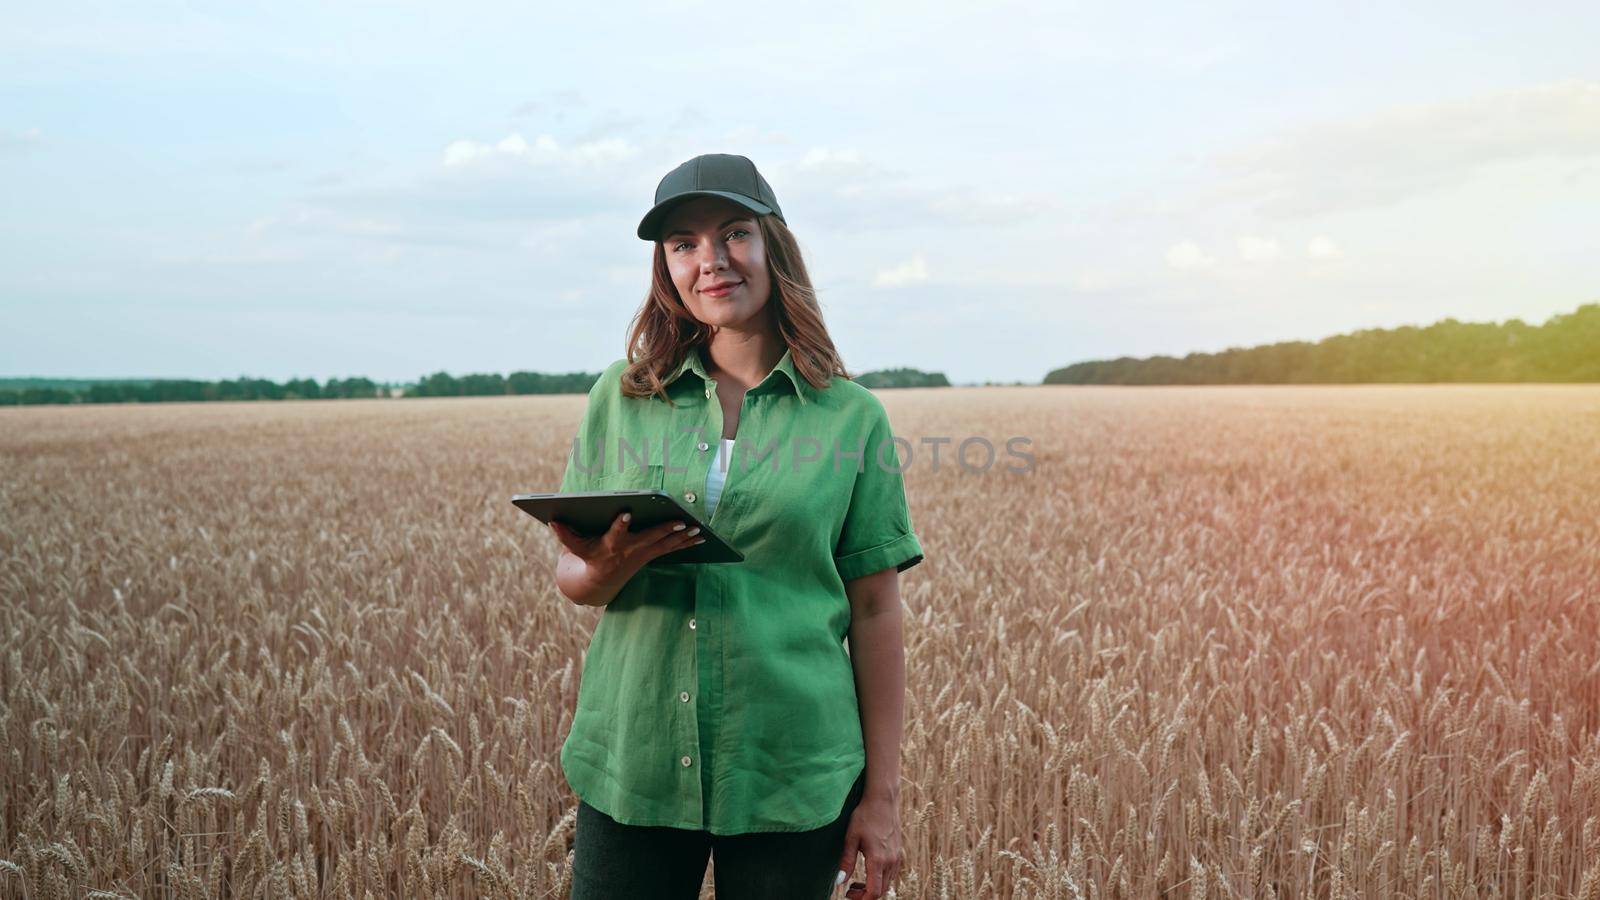 Woman agronomist works in ripe wheat field with digital tablet, checking integrity of ears, growth. Agricultural business, technology, smart eco system, harvest concept. by kristina_kokhanova